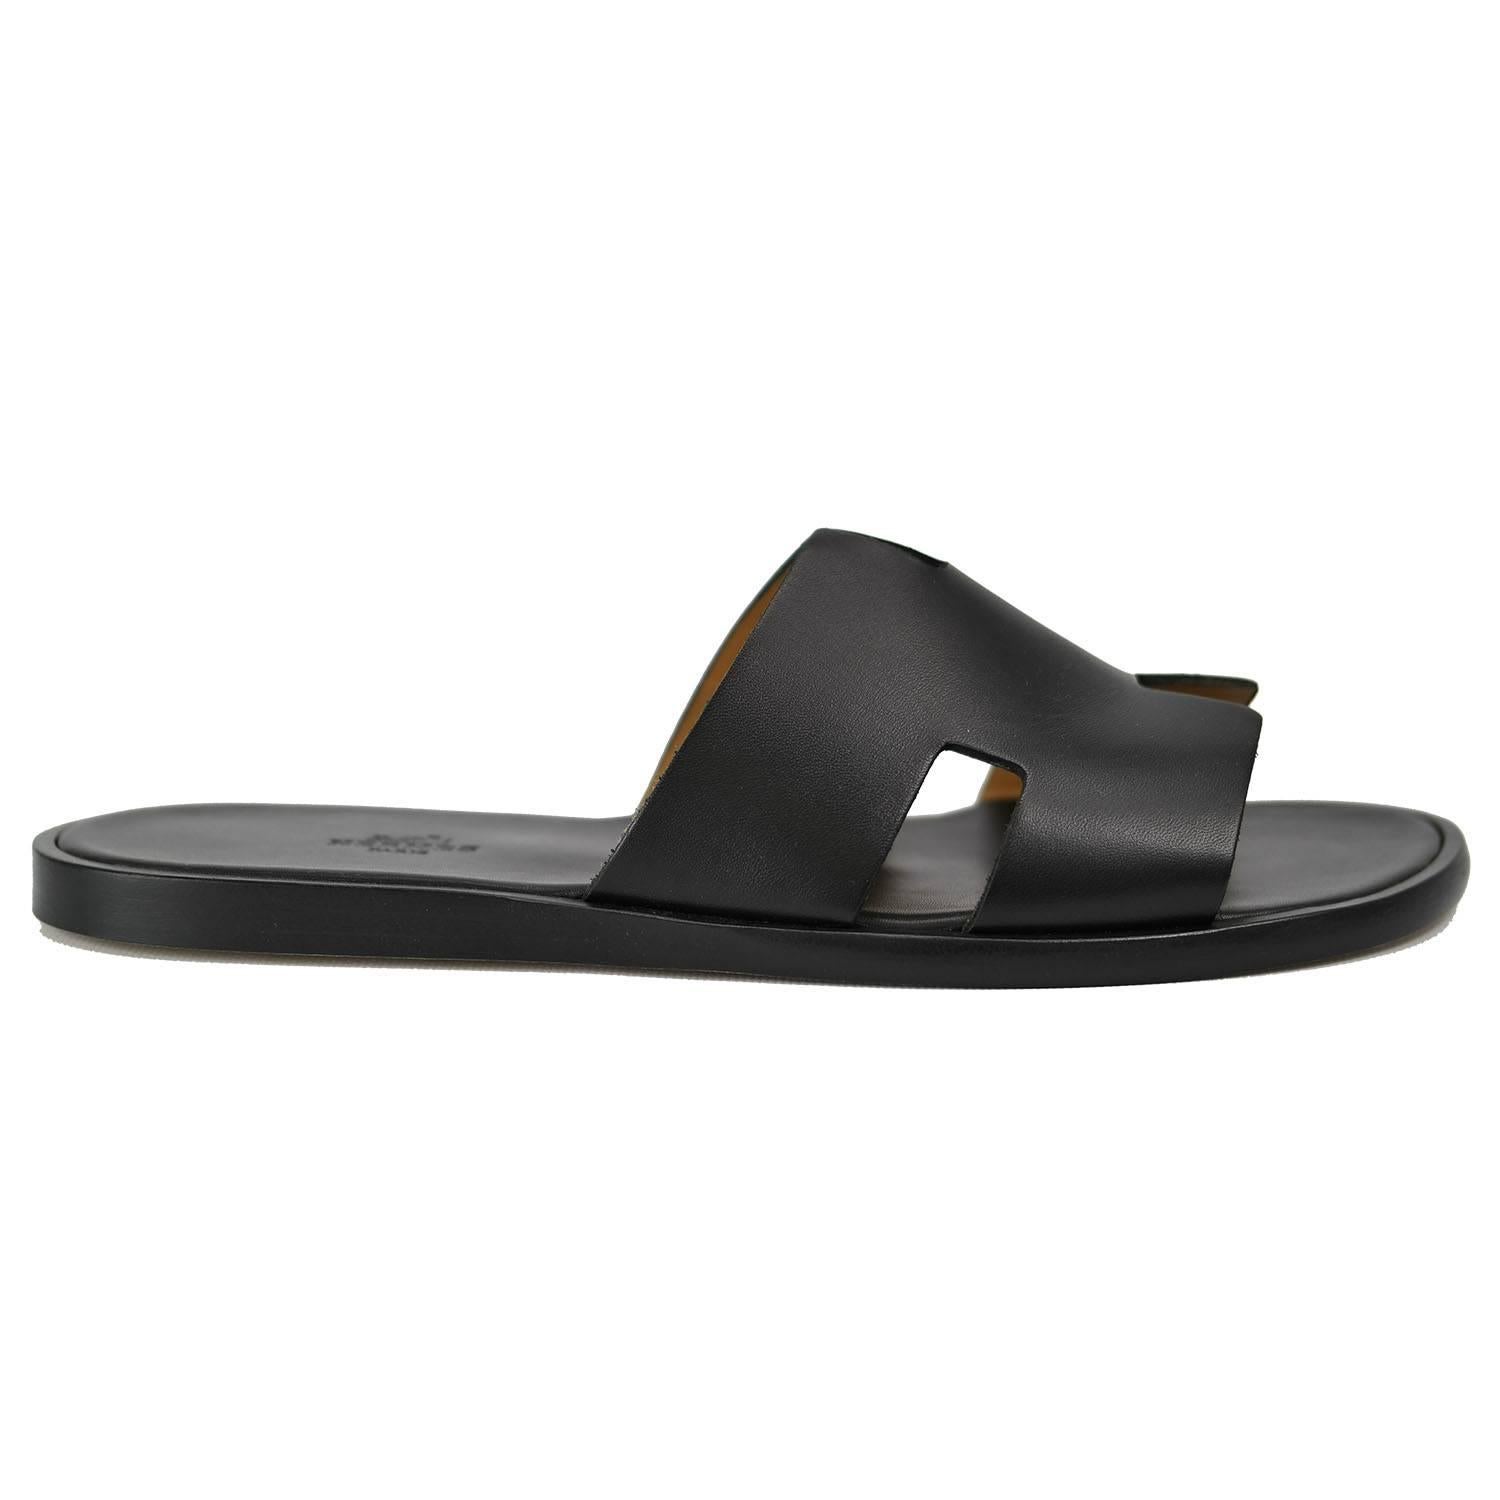 Hermes Men's Sandals Izmir Veau Leather Black Color 42 Size 2016

Pre-owned and never used. 
With the original Hermes box and the two dust bag protection.
Bought it in Hermes store in 2016.

The price of this item on Boutique Hermes is